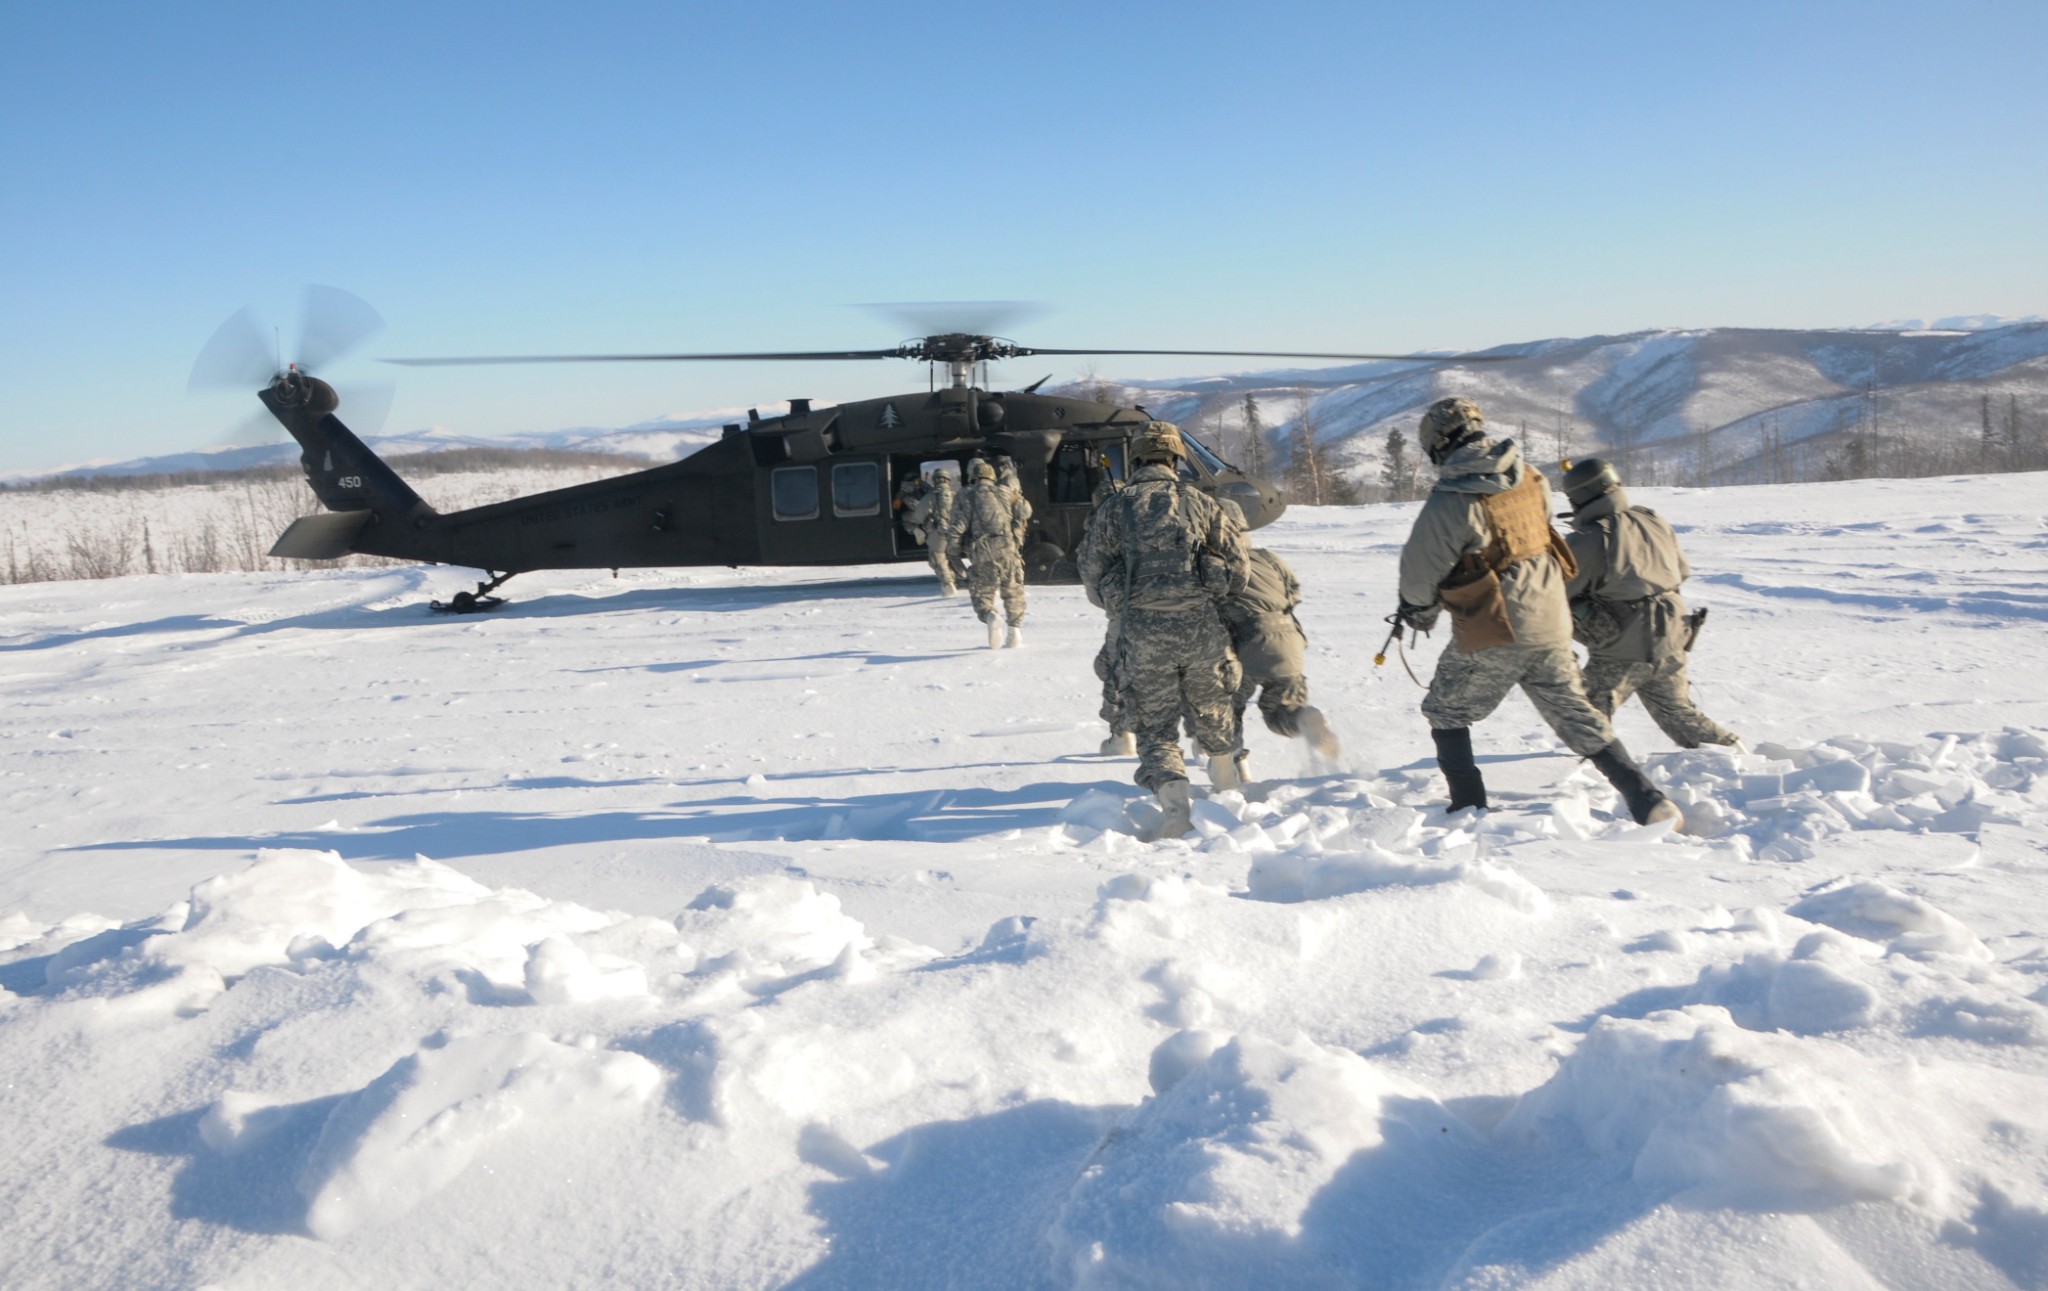 Members of 1st Battalion, 297th Infantry Regiment based in Fairbanks, Alaska and part of the Alaska National Guard prepare to board a UH-60 Black Hawk Helicopter operated by members of 1st Battalion, 169th Aviation Regiment of the New Hampshire National Guard Feb. 28, in the Yukon Training Area on Eielson Air Force Base as part of exercise Arctic Eagle 2020.